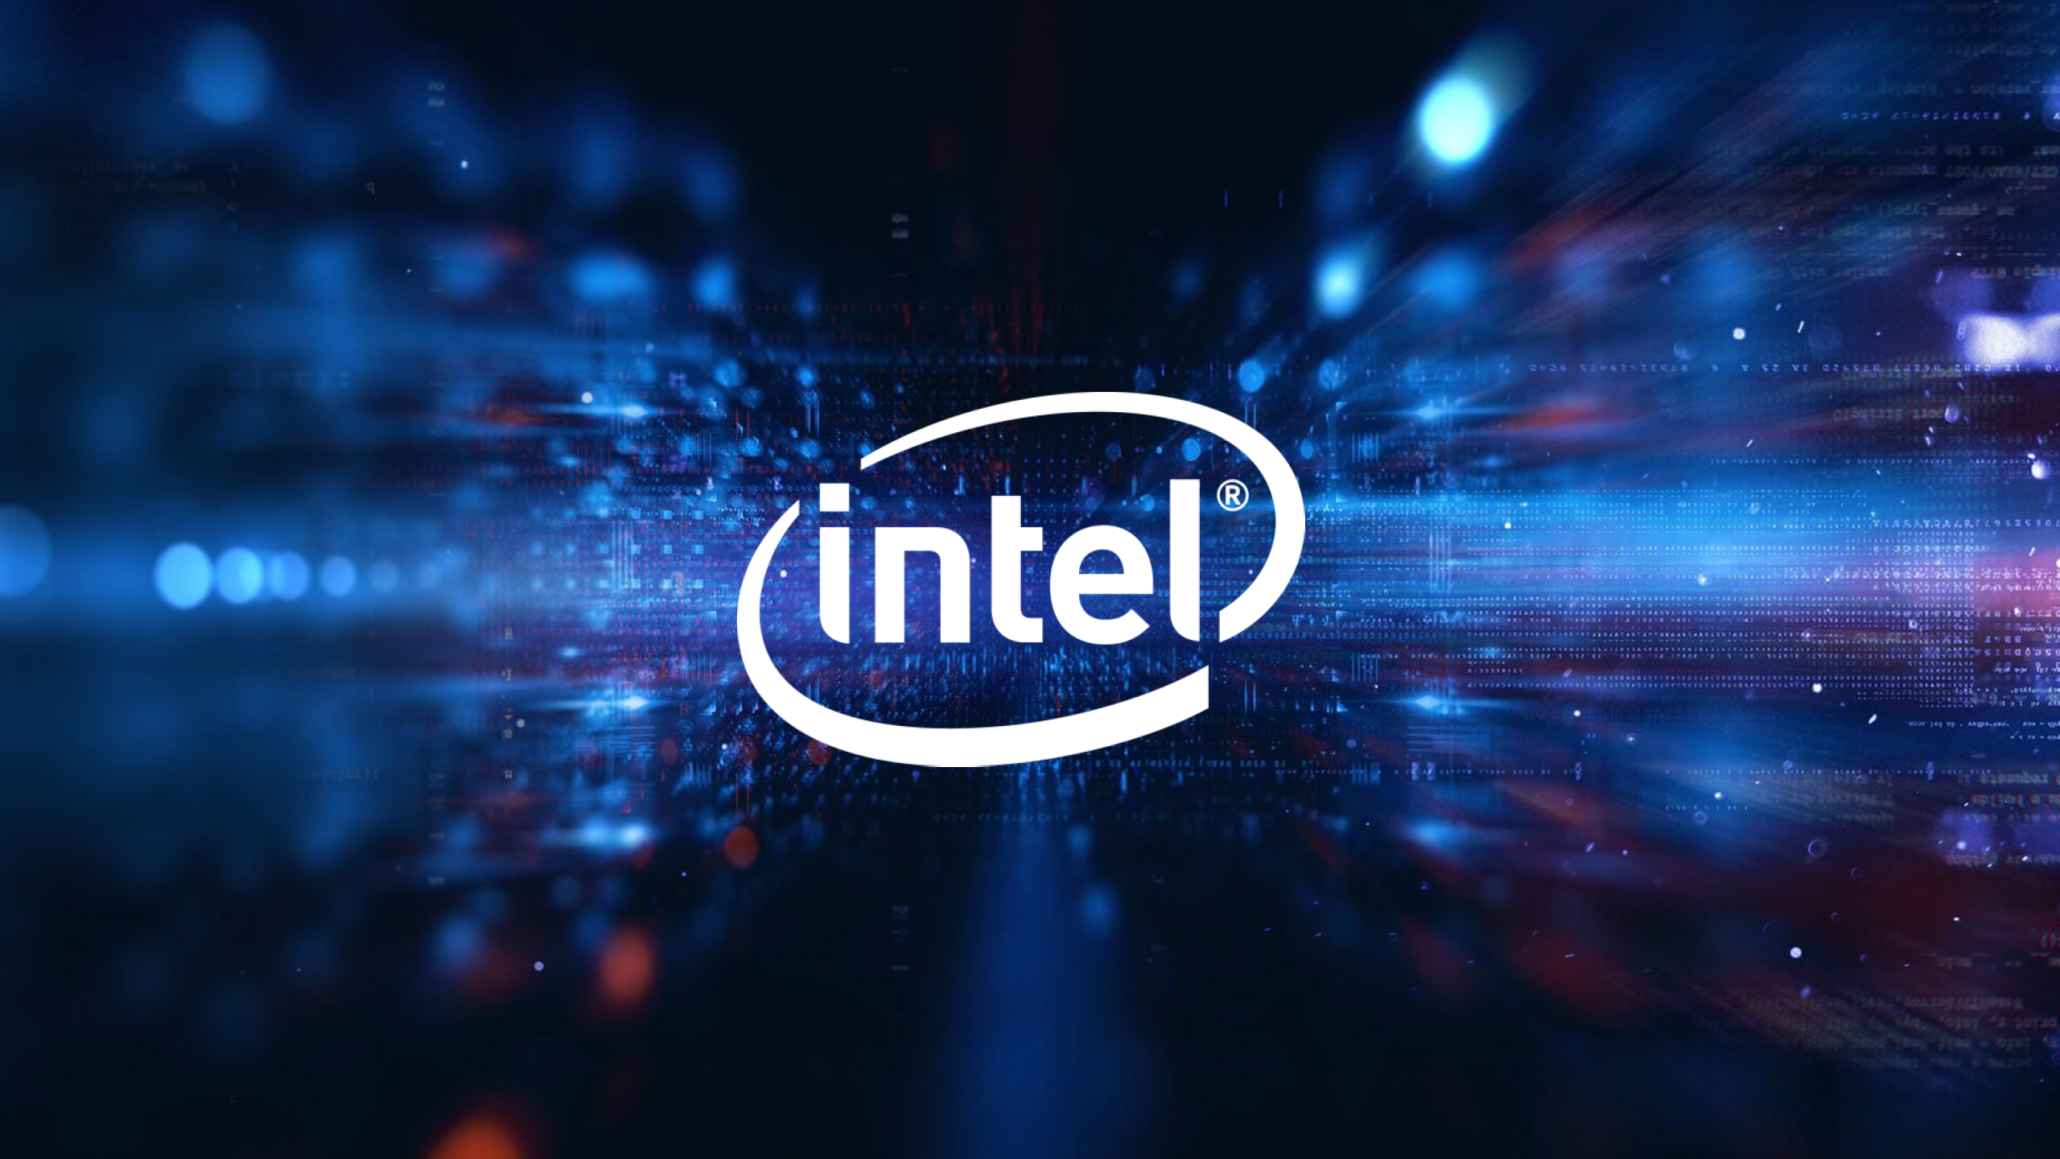 Intel stopped its activities in Russia - Digit News